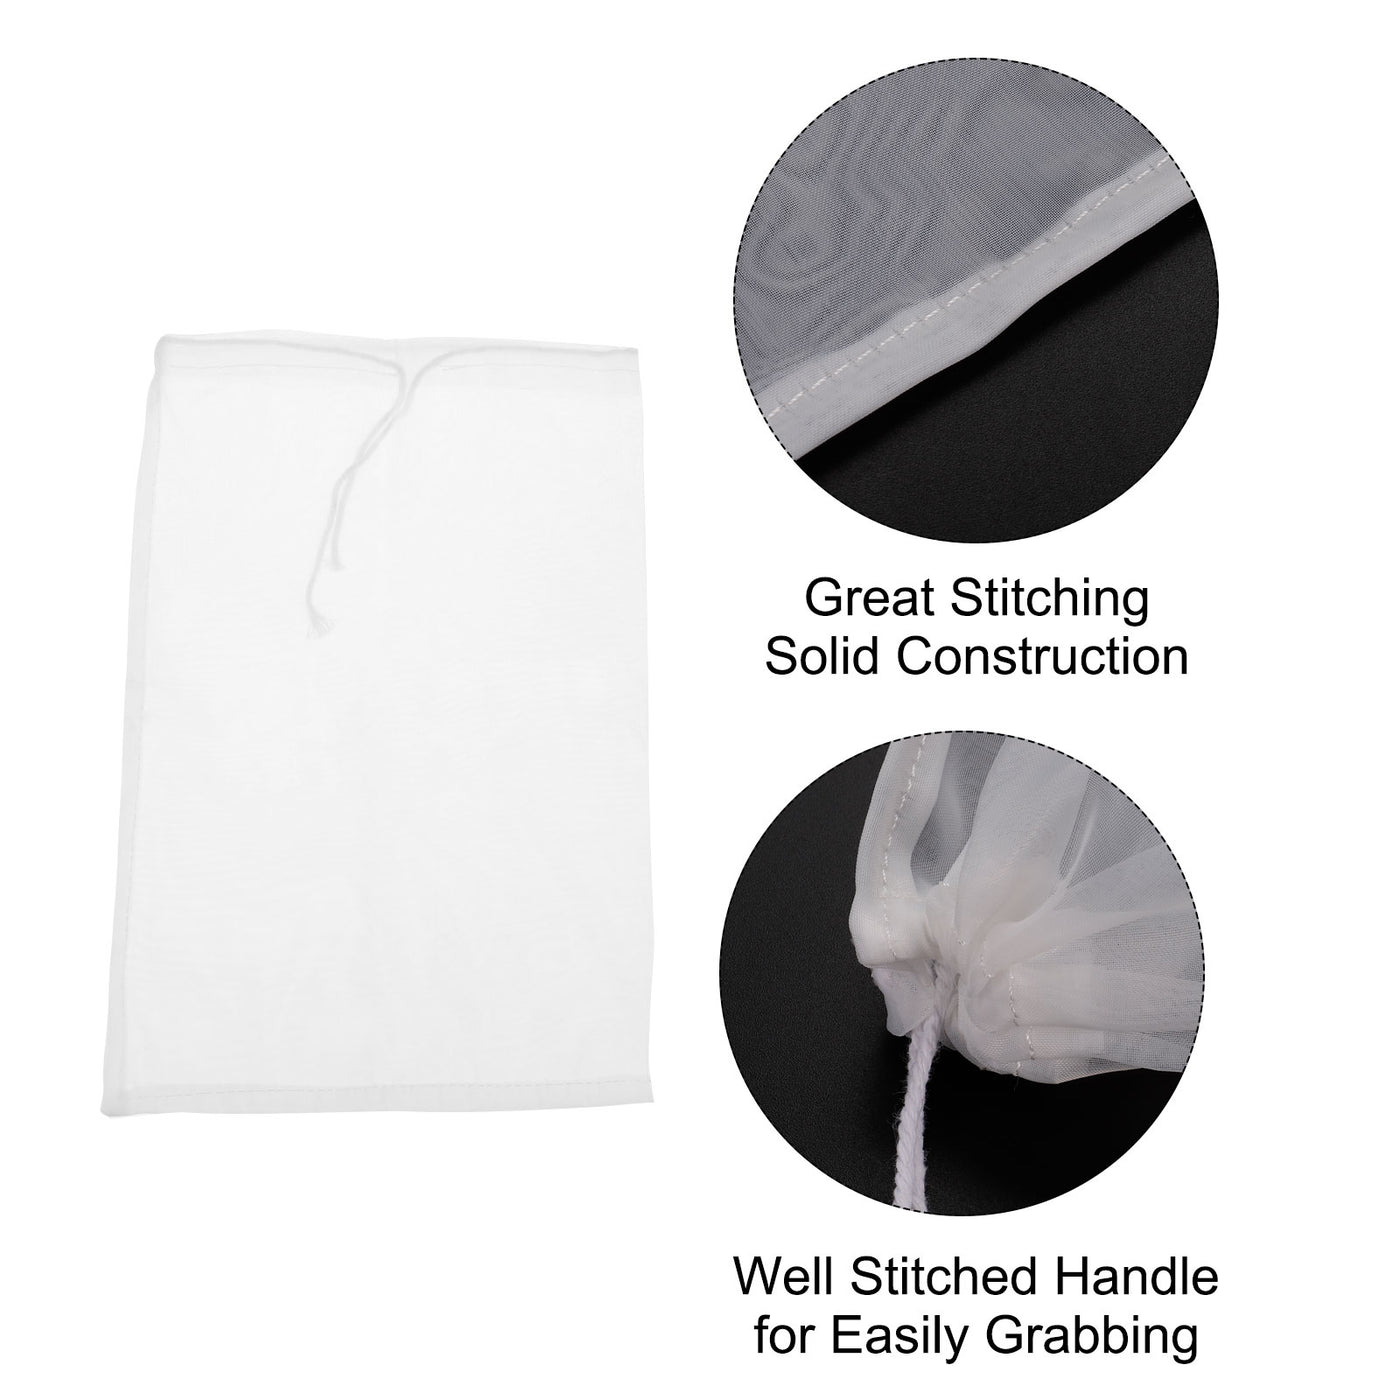 uxcell Uxcell Paint Filter Bag 100 Mesh (11.8"x7.9") Nylon Strainer for Filtering Paint